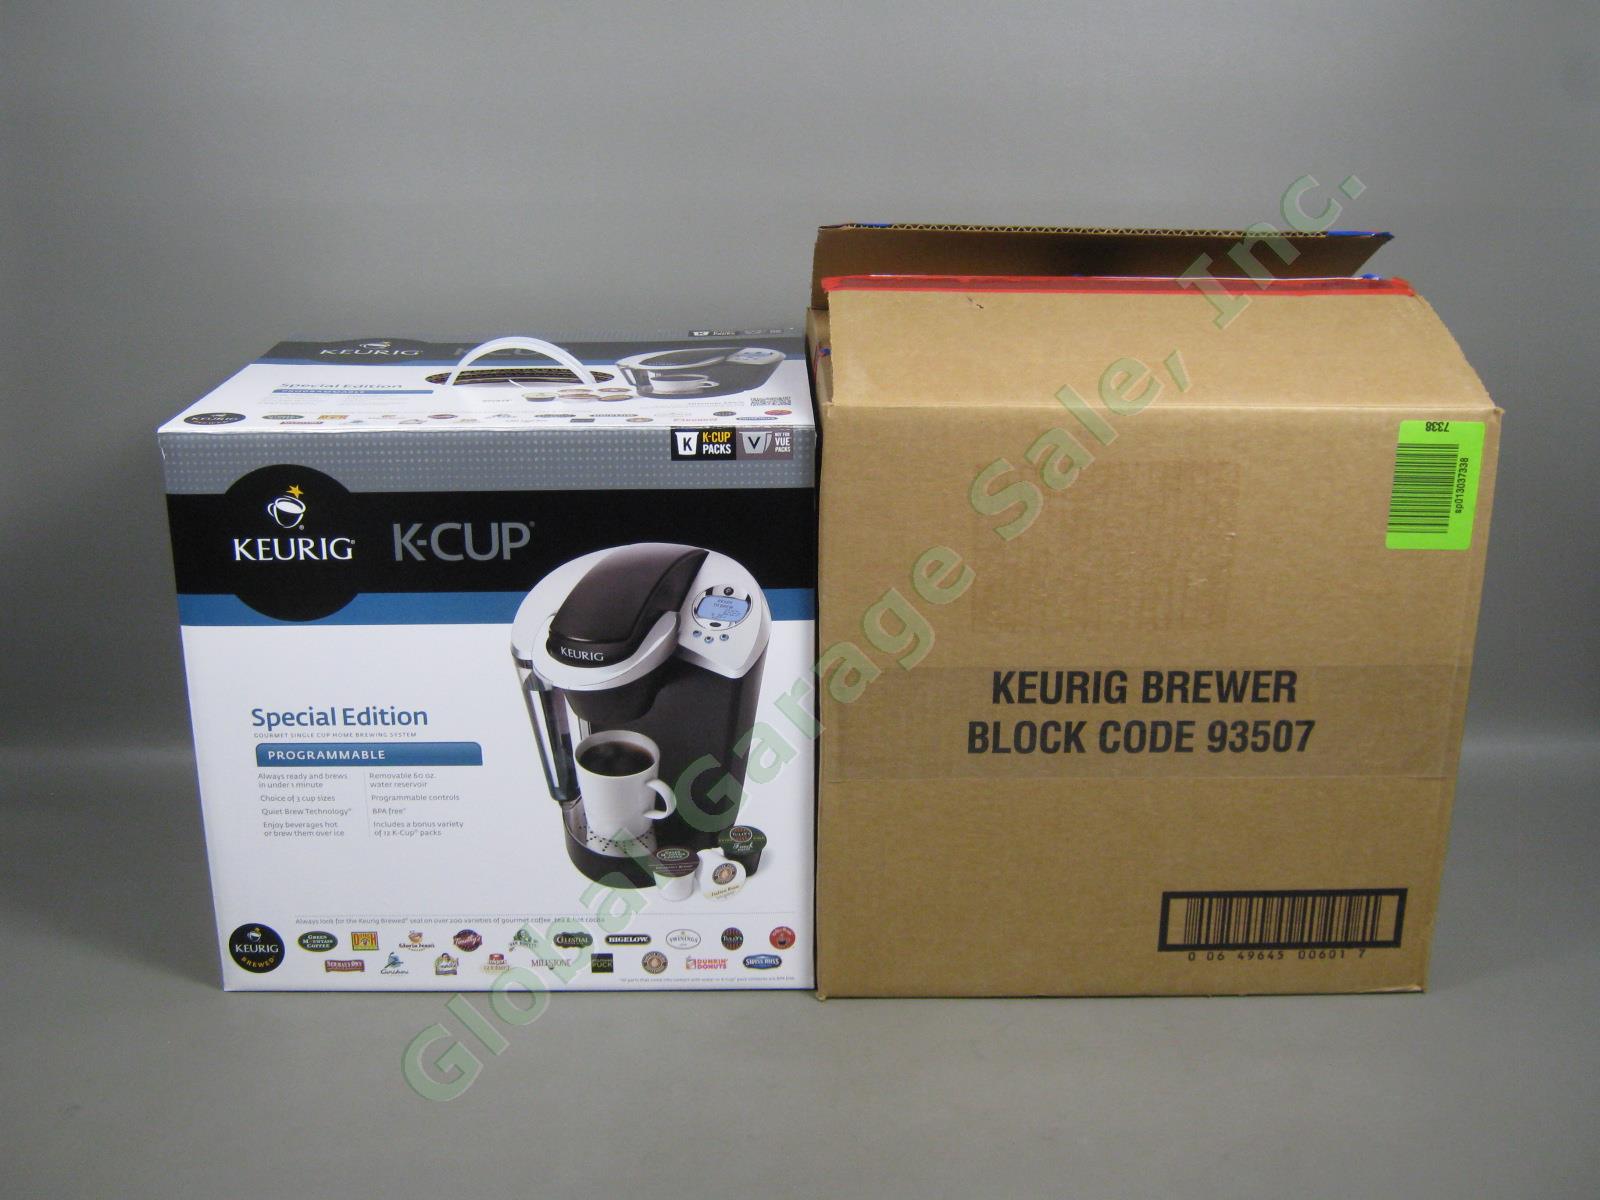 NEW Keurig B60 K-Cup Special Edition Single Coffee Maker Brewer Brewing System